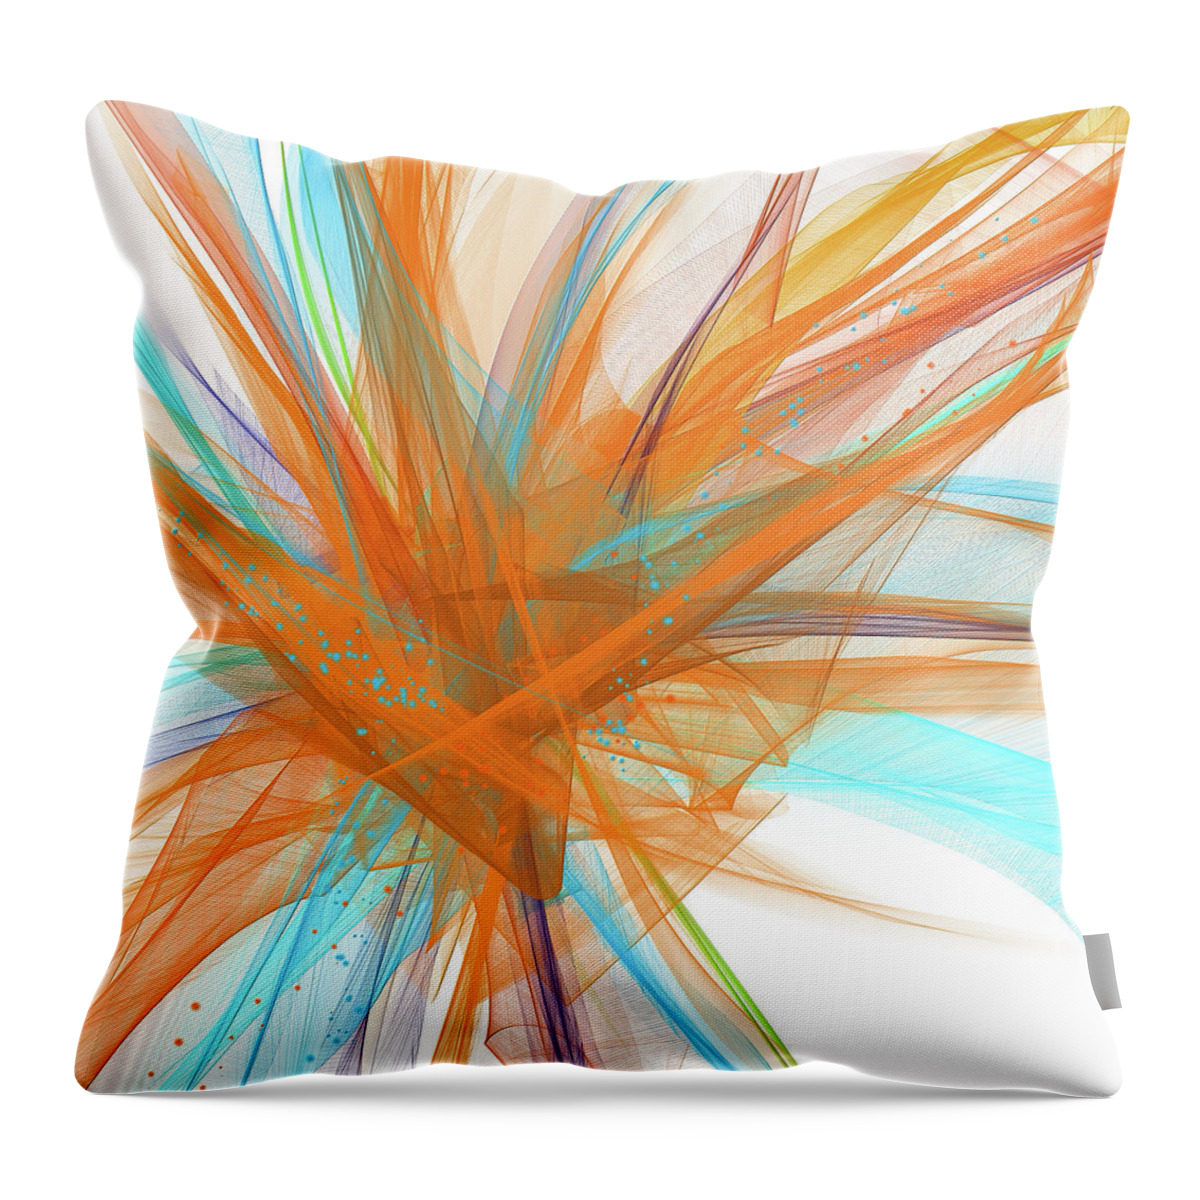 Turquoise Art Throw Pillow featuring the painting Turquoise And Orange Art by Lourry Legarde